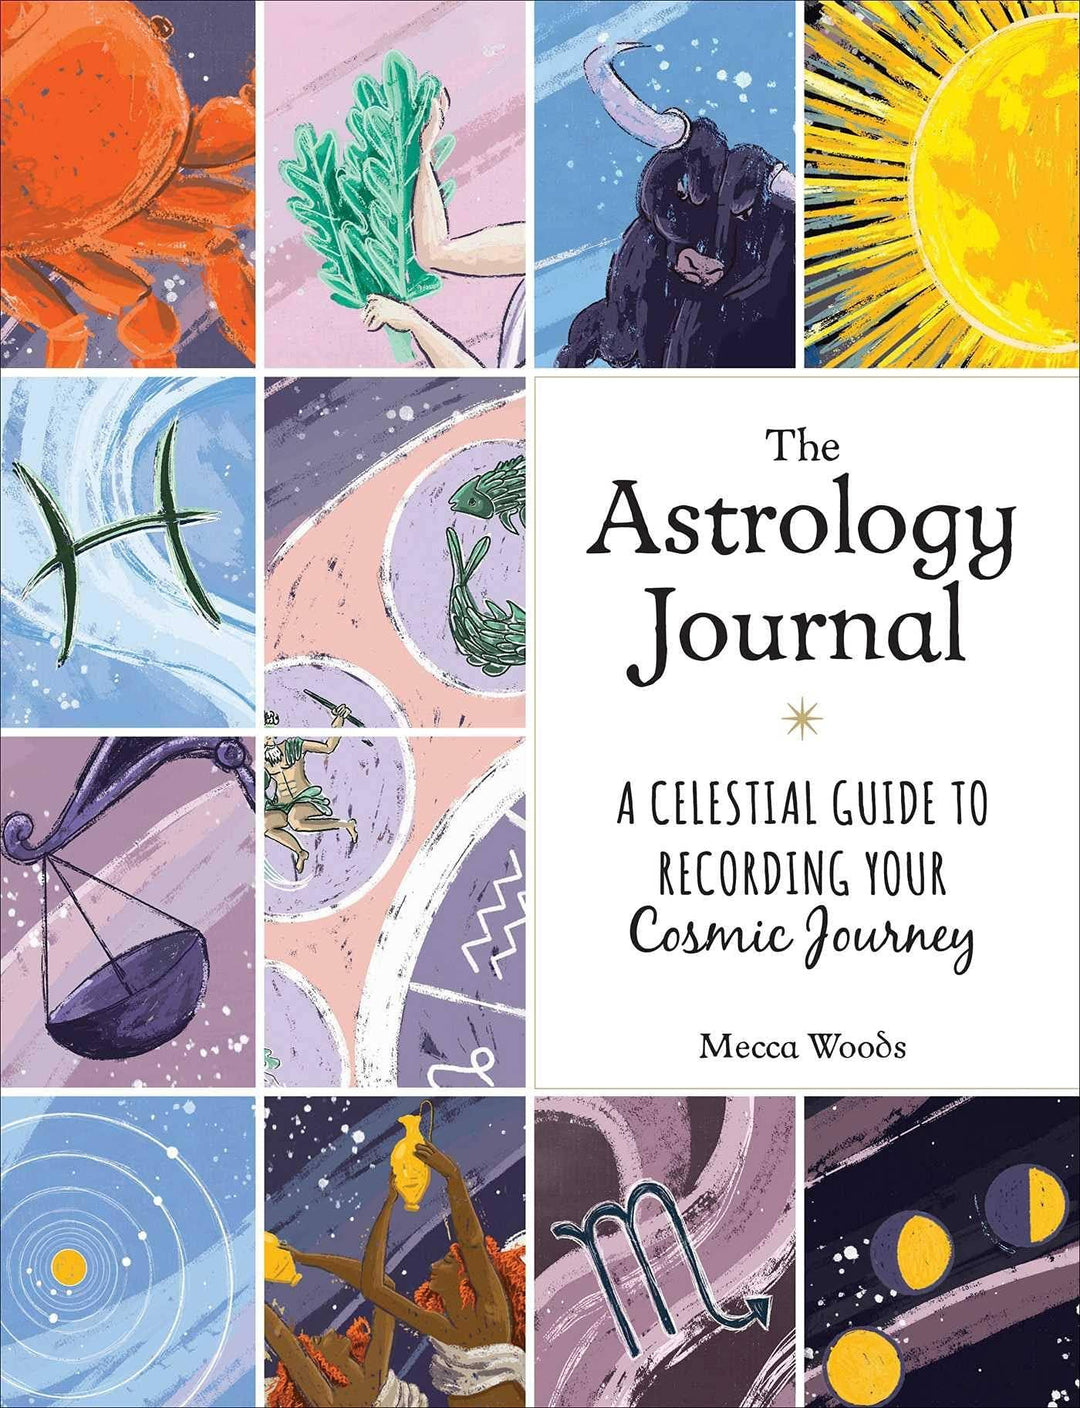 Astrology Journal: A Celestial Guide to Your Cosmic Journey - Esme and Elodie